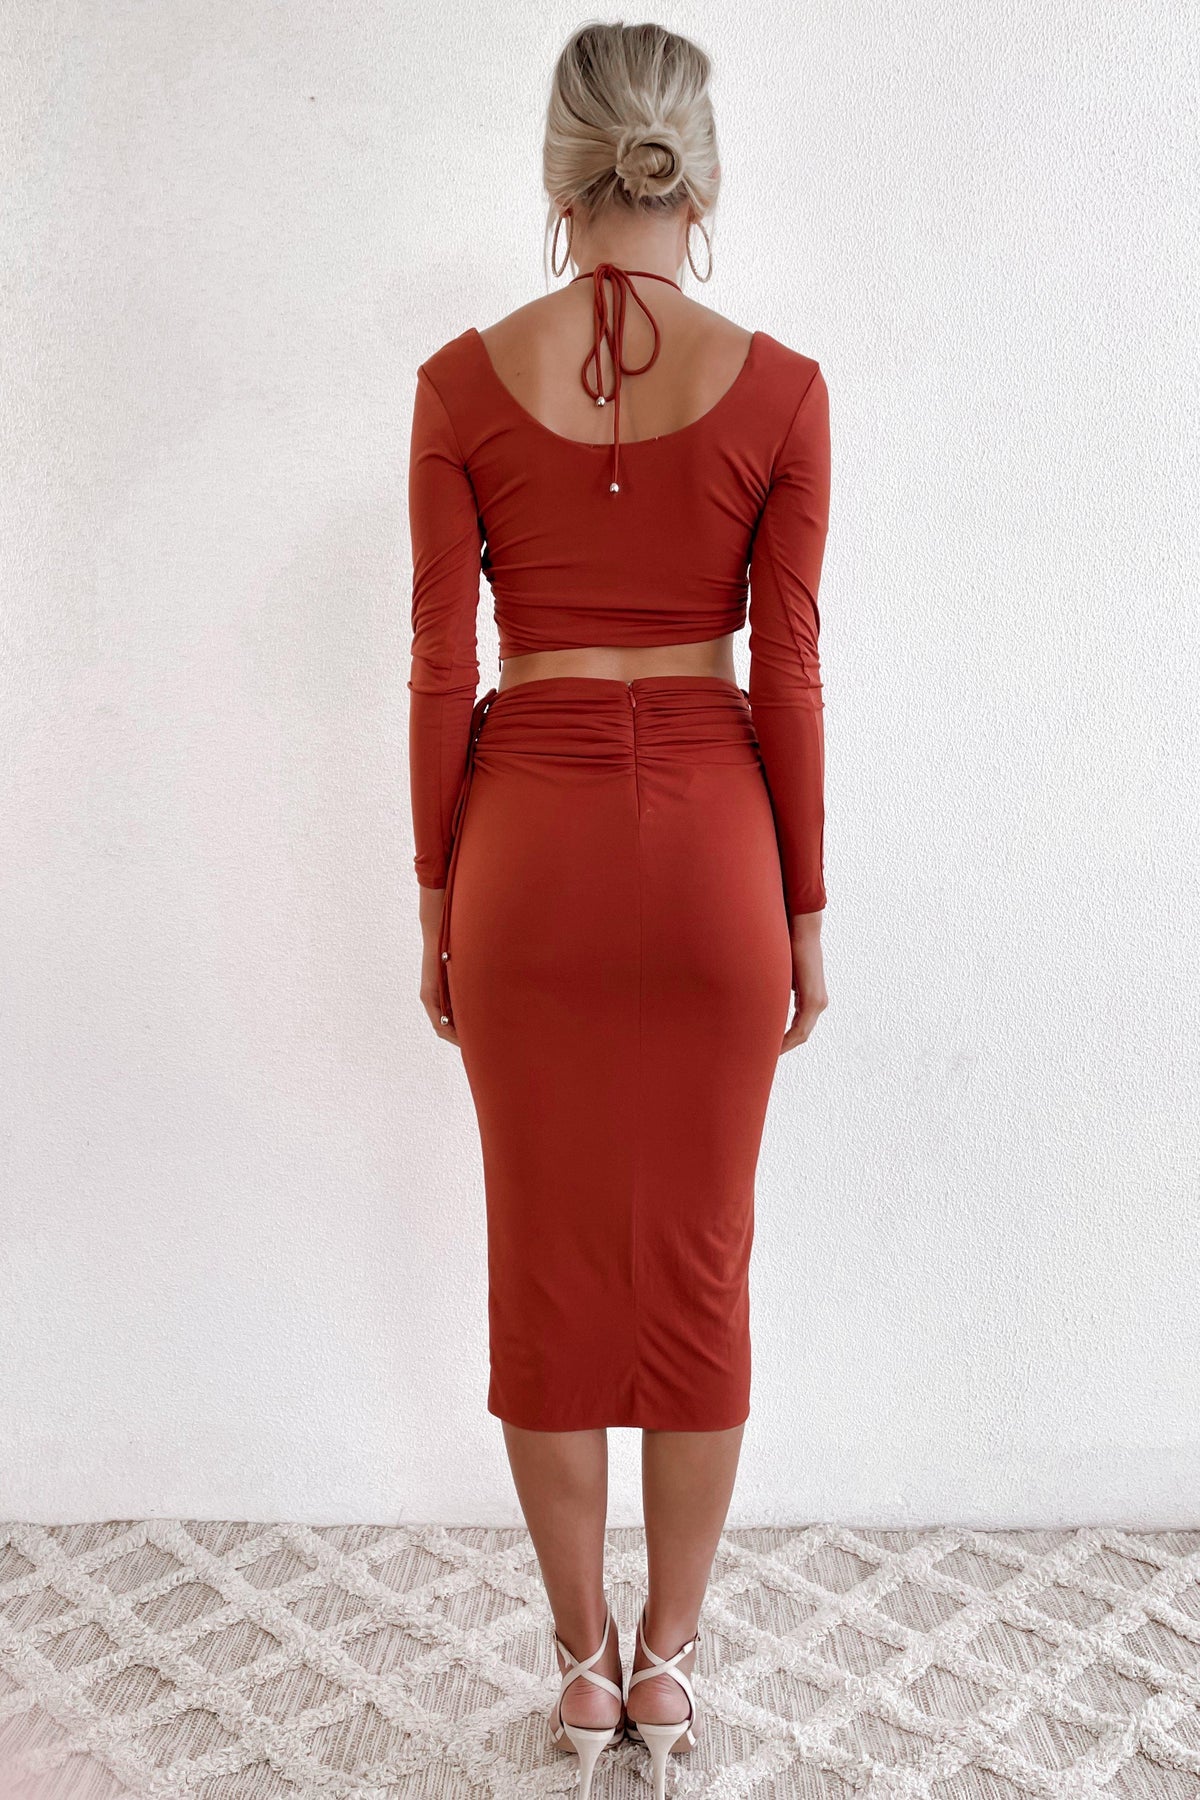 Heavenly Skirt, BOTTOMS, MIDI SKIRT, RED, Sale, SKIRTS, Shop The Latest Heavenly Skirt Only 60.00 from MISHKAH FASHION:, Our New Heavenly Skirt is only $61.00-We Have The Latest Pants | Shorts | Skirts @ Mishkah Online Fashion Boutique-MISHKAH